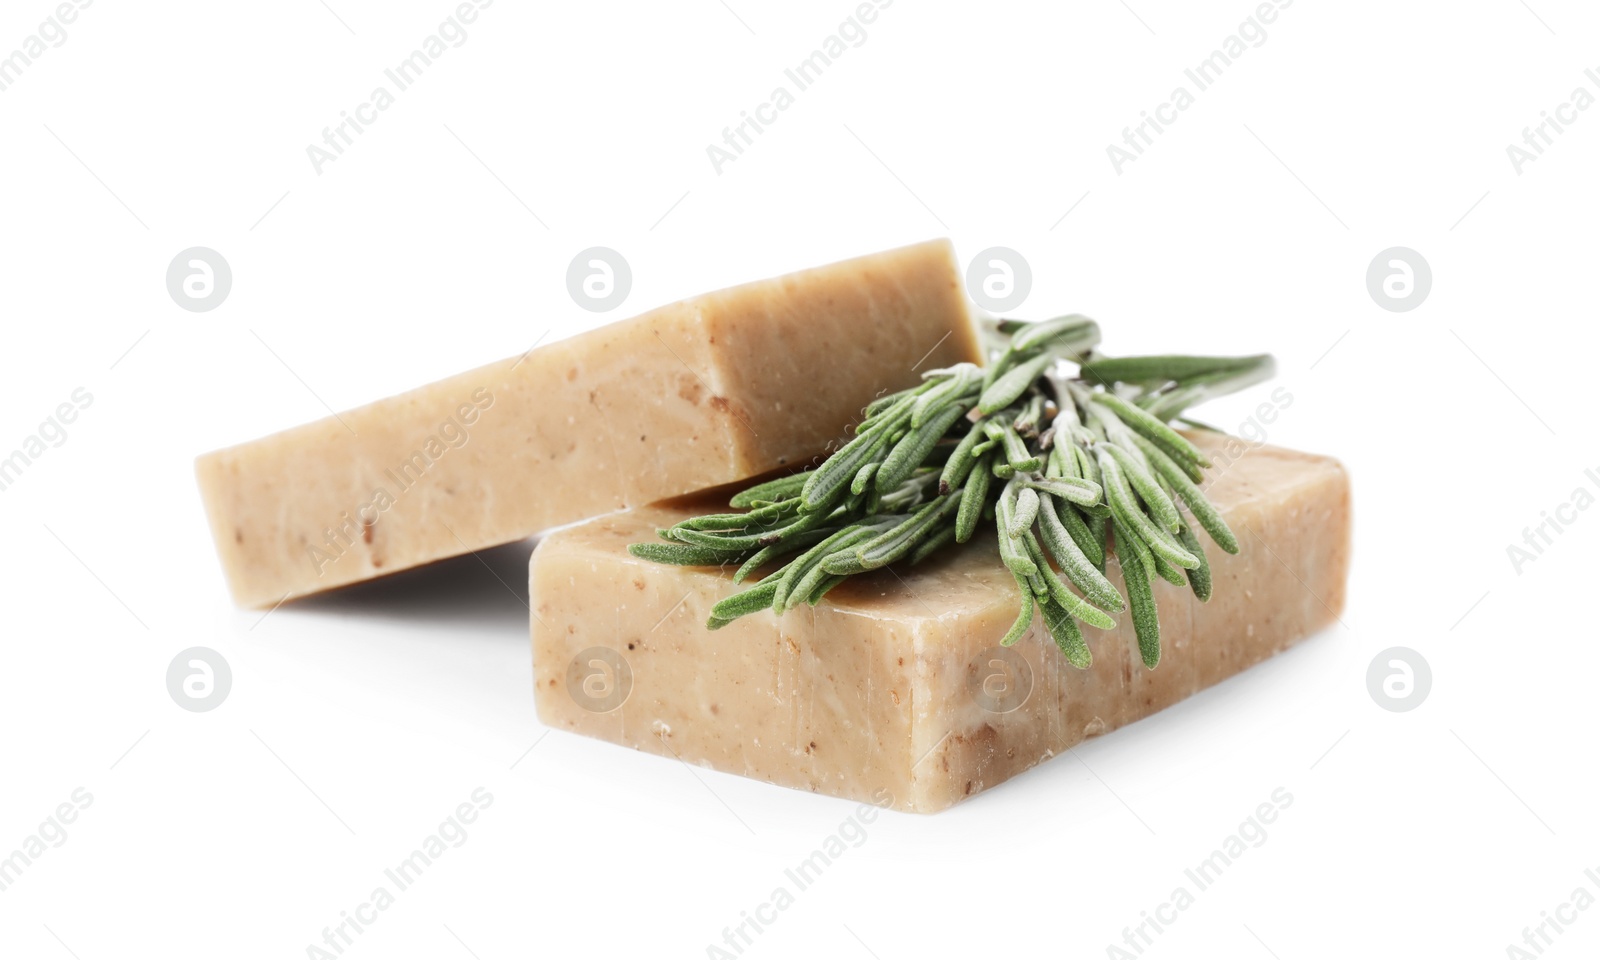 Photo of Handmade soap bars and rosemary on white background